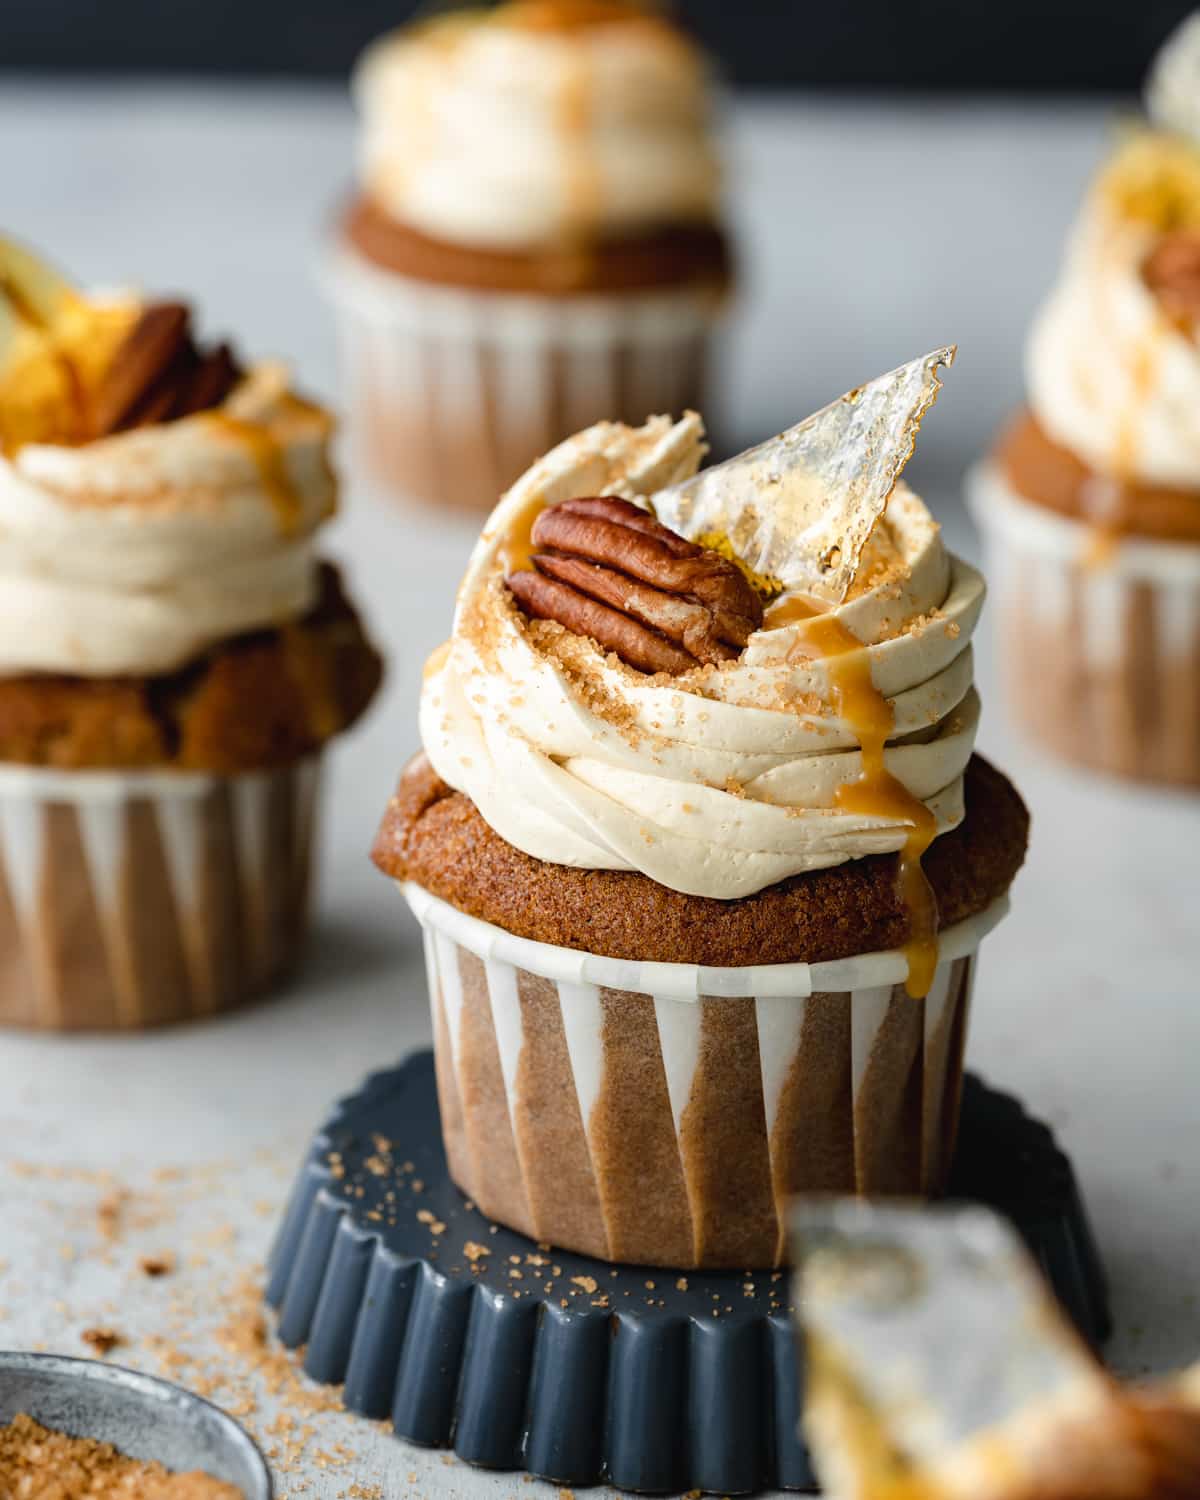 caramel cupcakes topped with pecans and caramel shards.